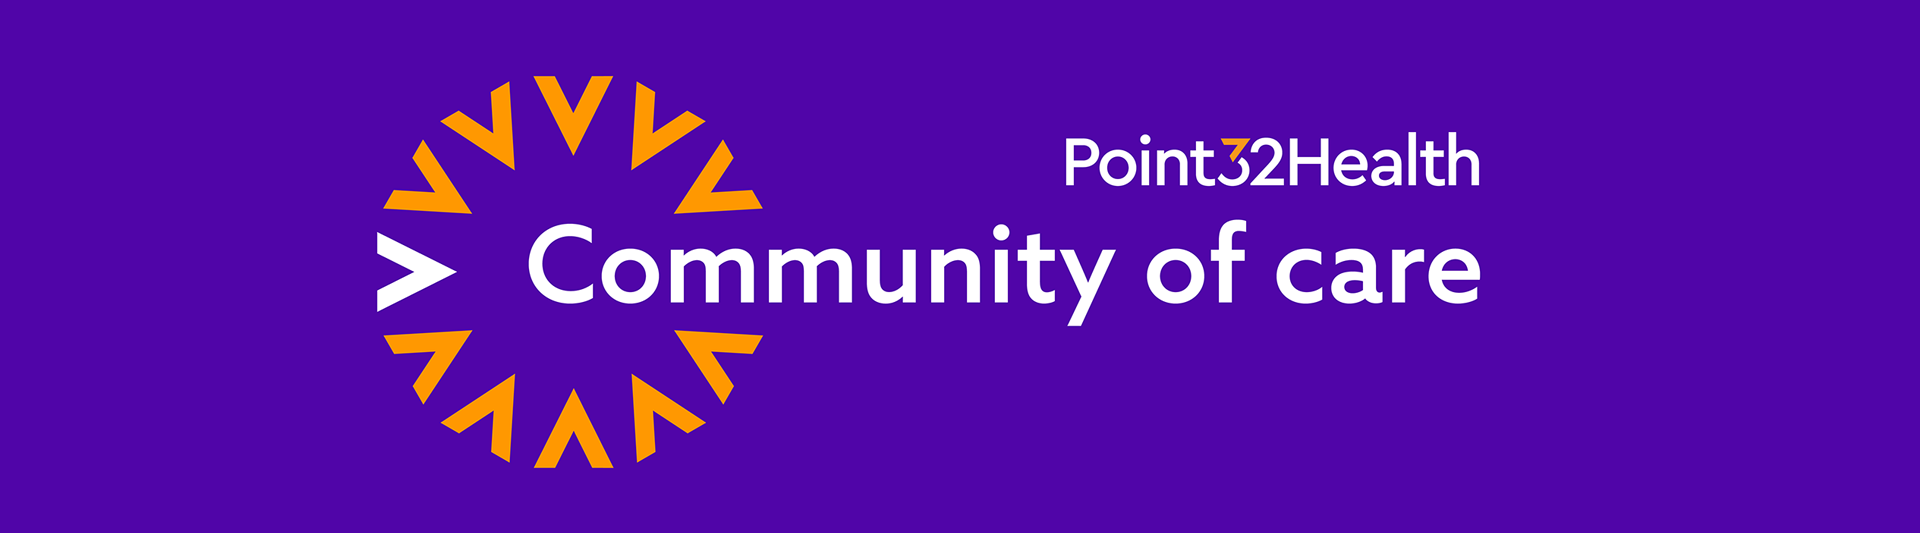 Point32Health Community of Care